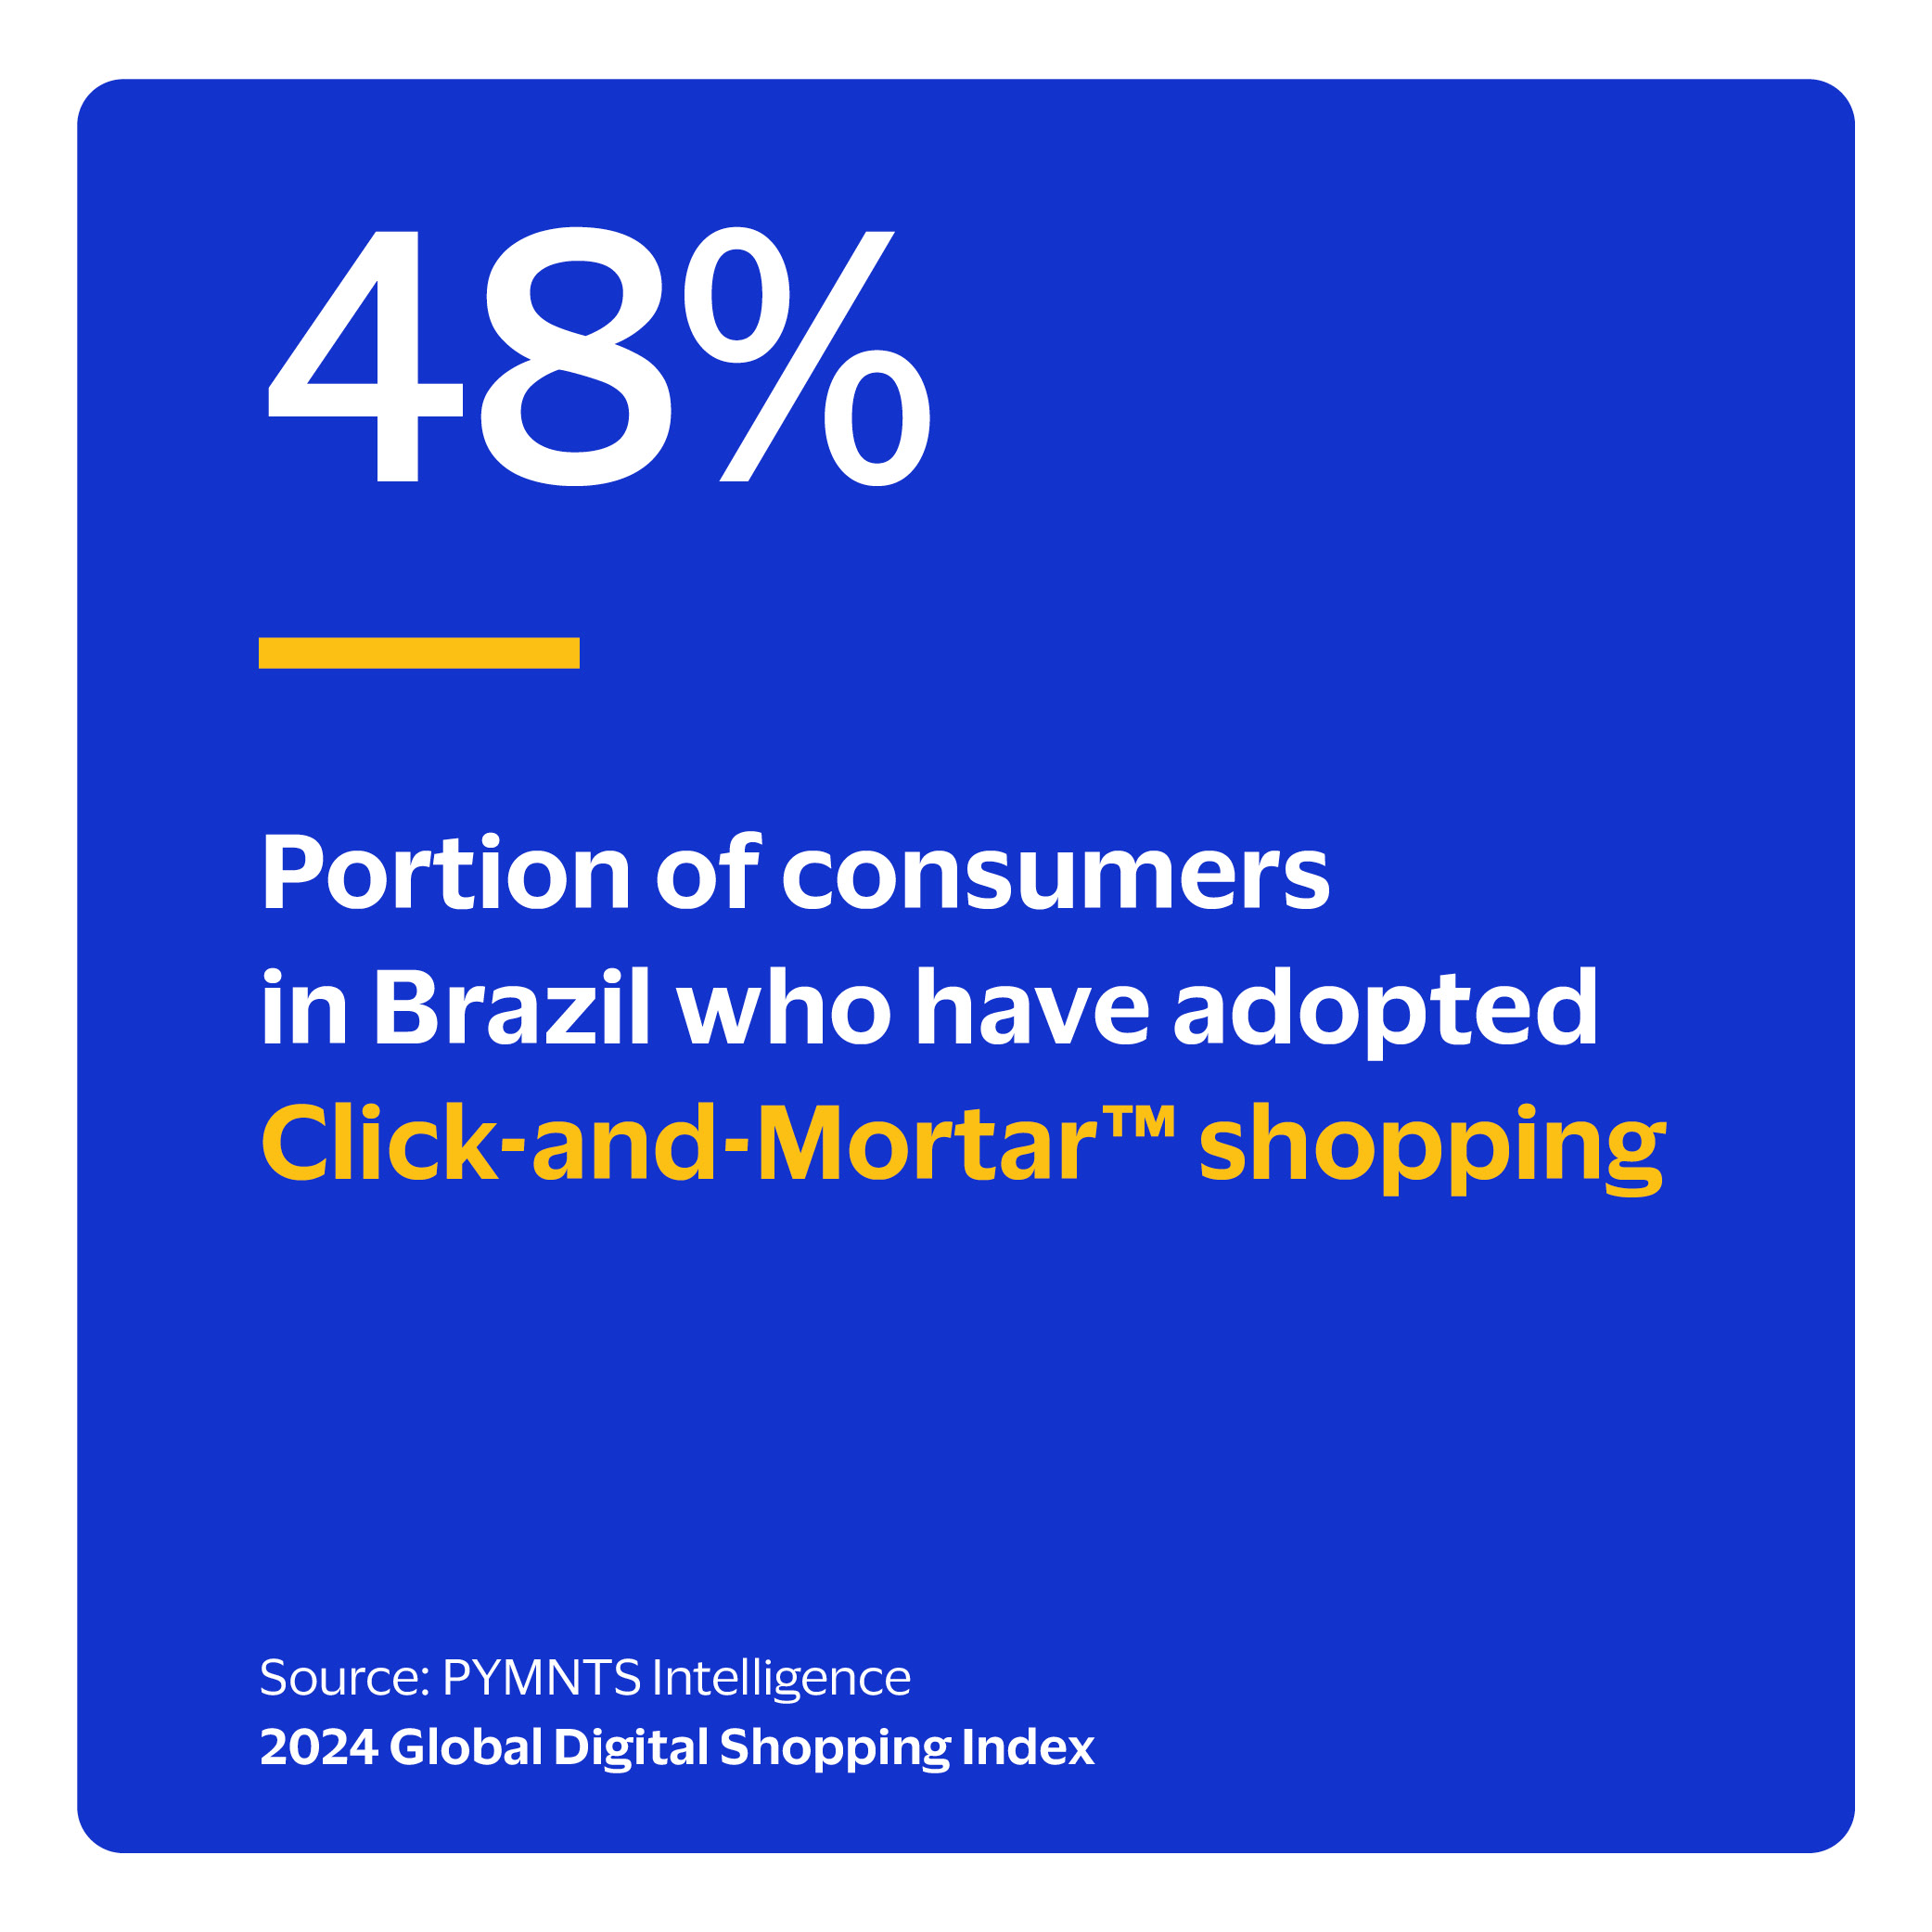  Portion of consumers in Brazil who have adopted Click-and-Mortar™ shopping 